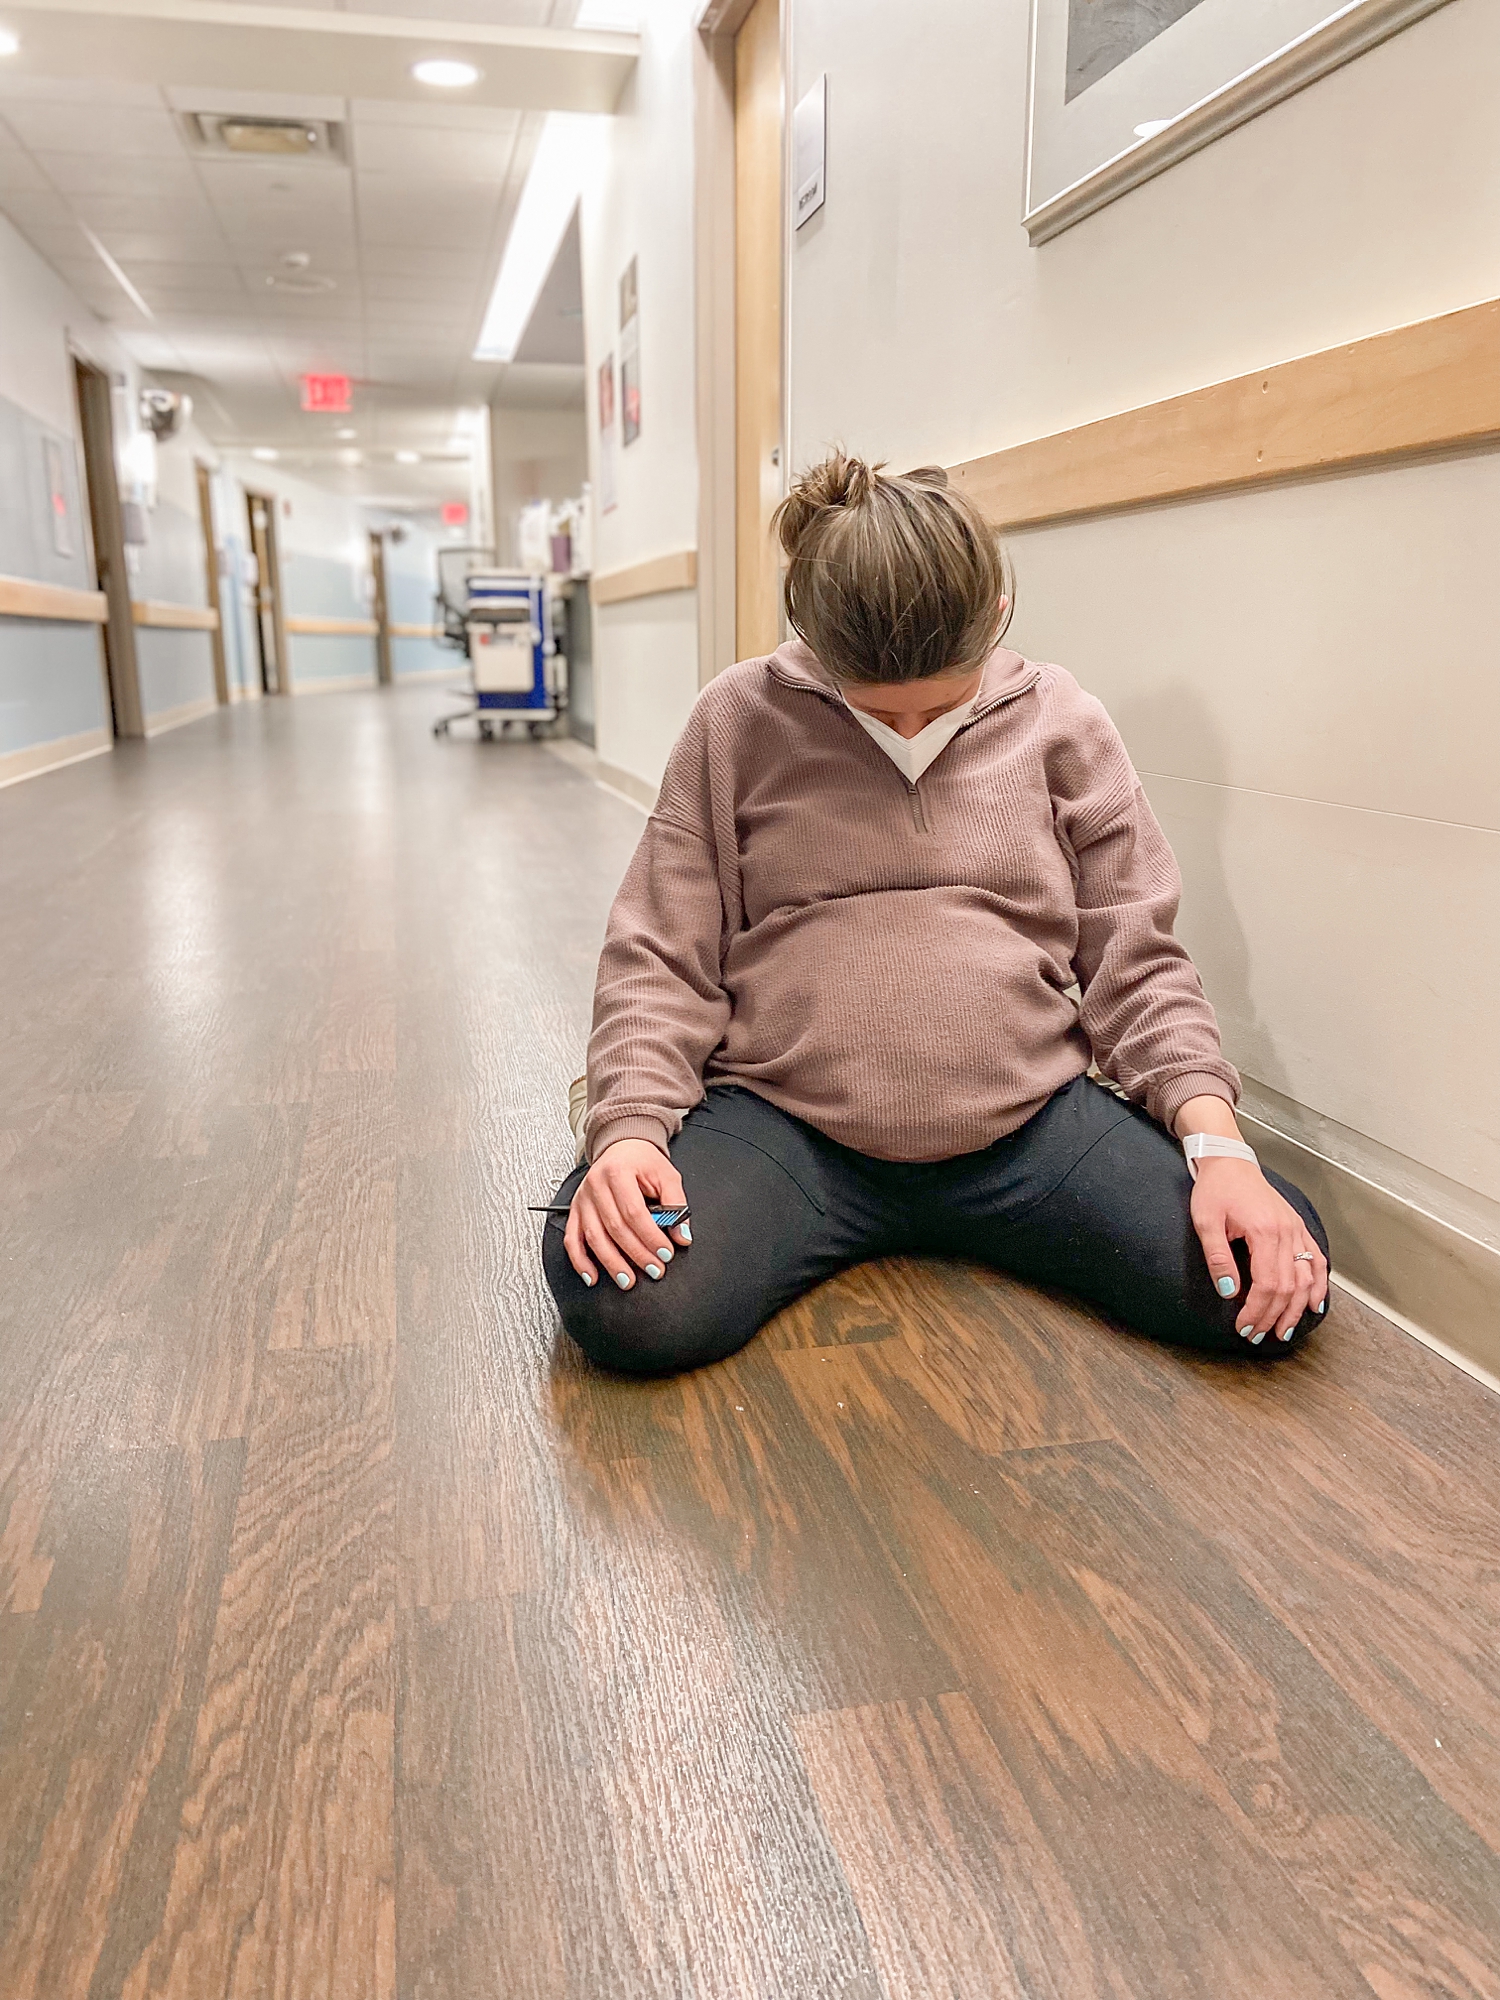 woman sits on floor during contraction